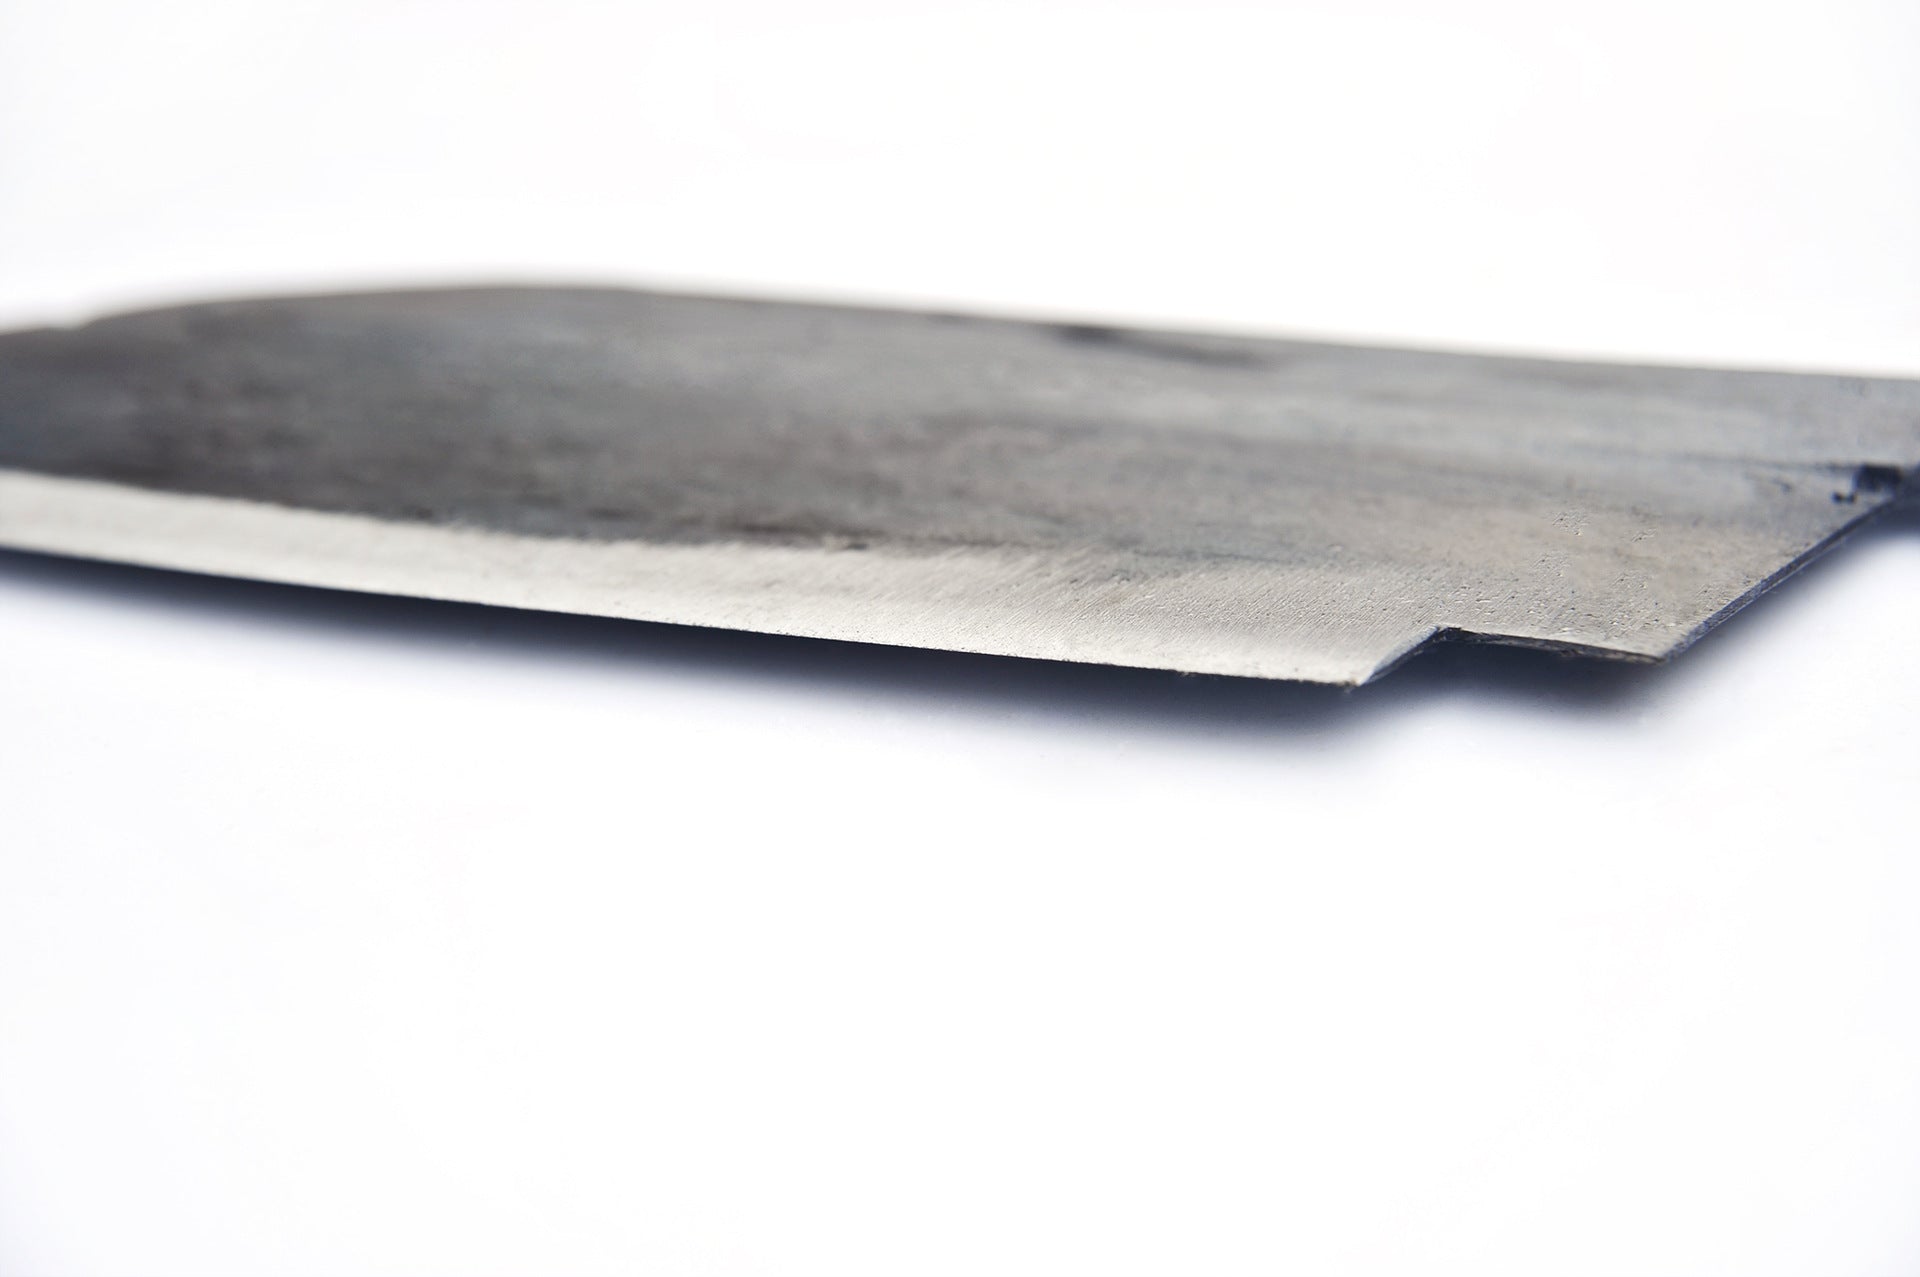 Dull Knife with Cheap Steel